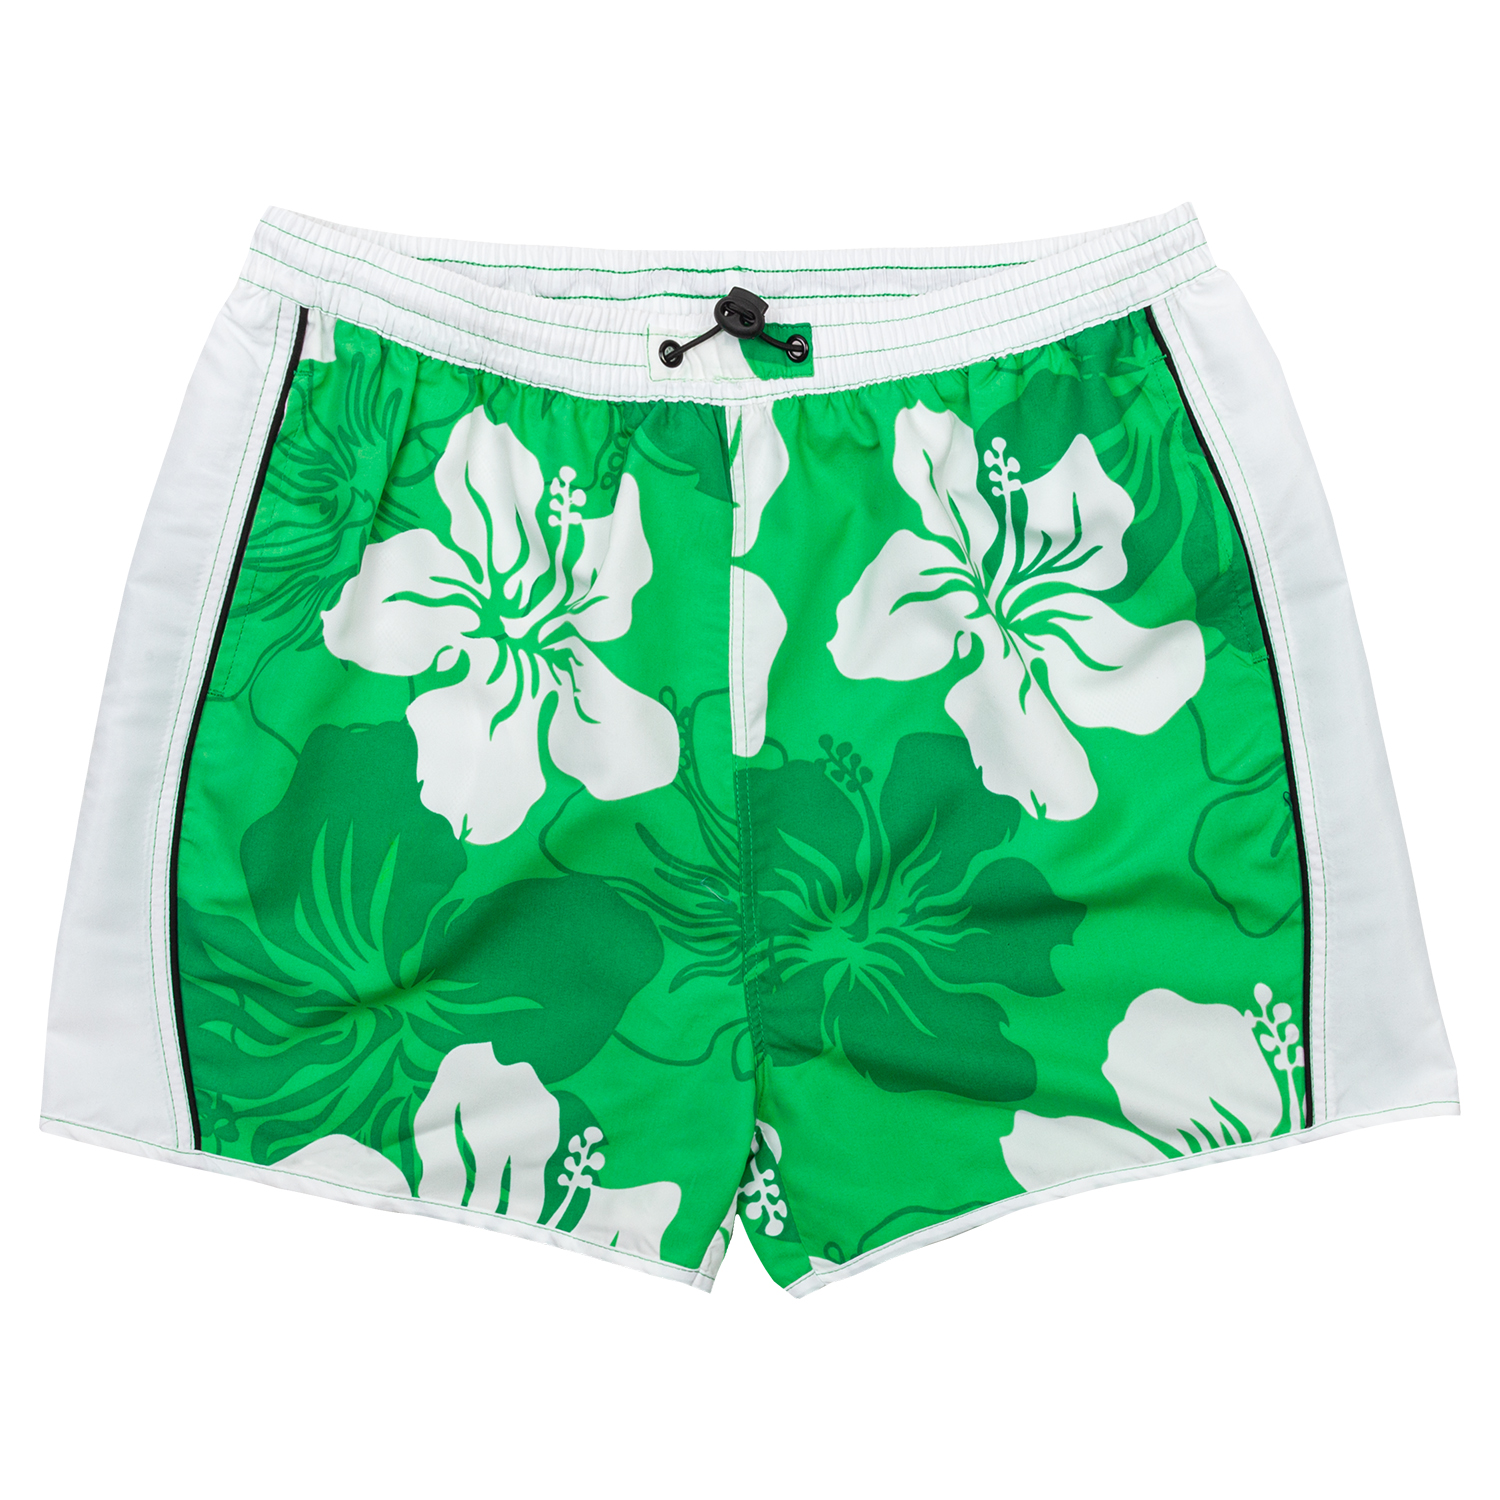 Swim shorts by eleMar for men green-white patterned in oversizes up to 6XL